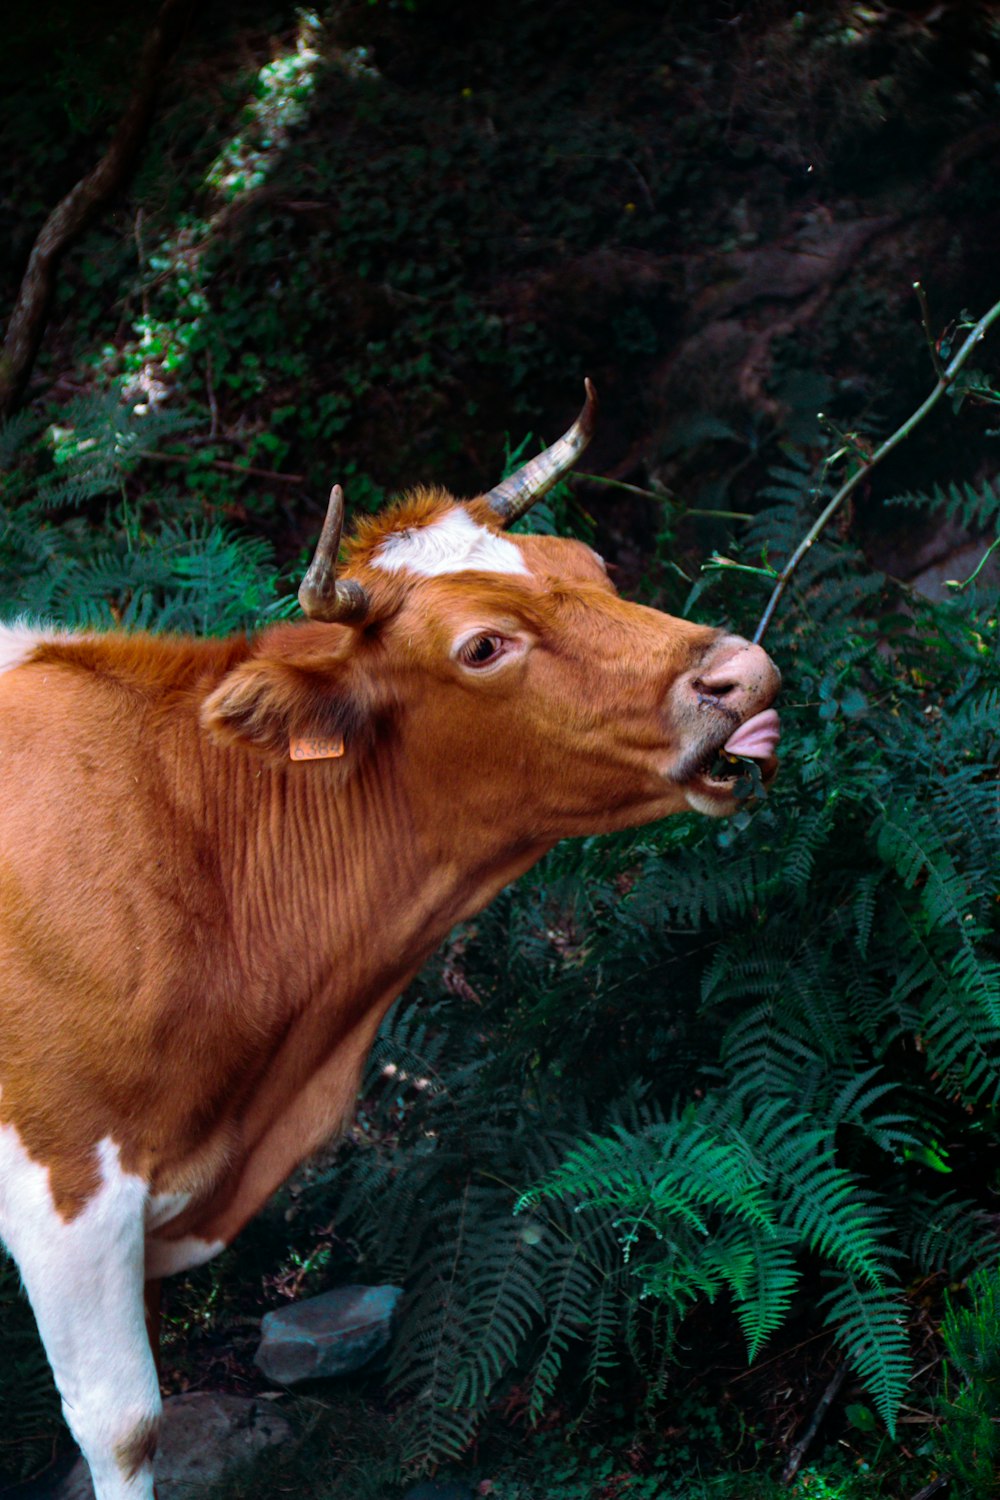 a brown and white cow standing next to a lush green forest